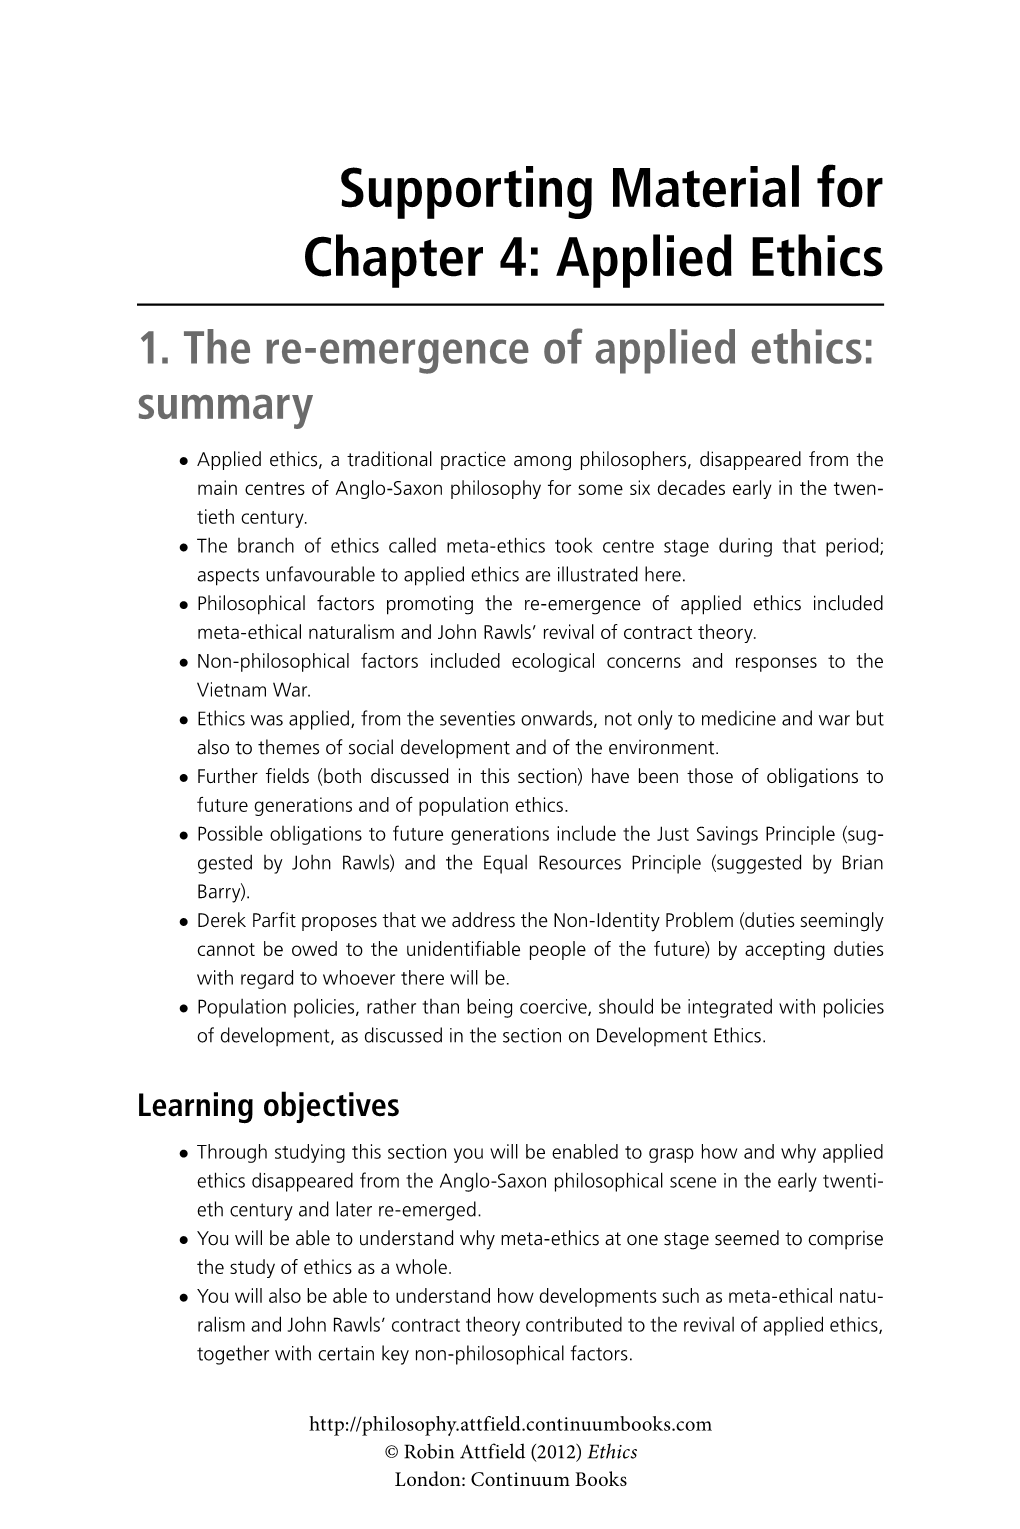 Supporting Material for Chapter 4, Applied Ethics